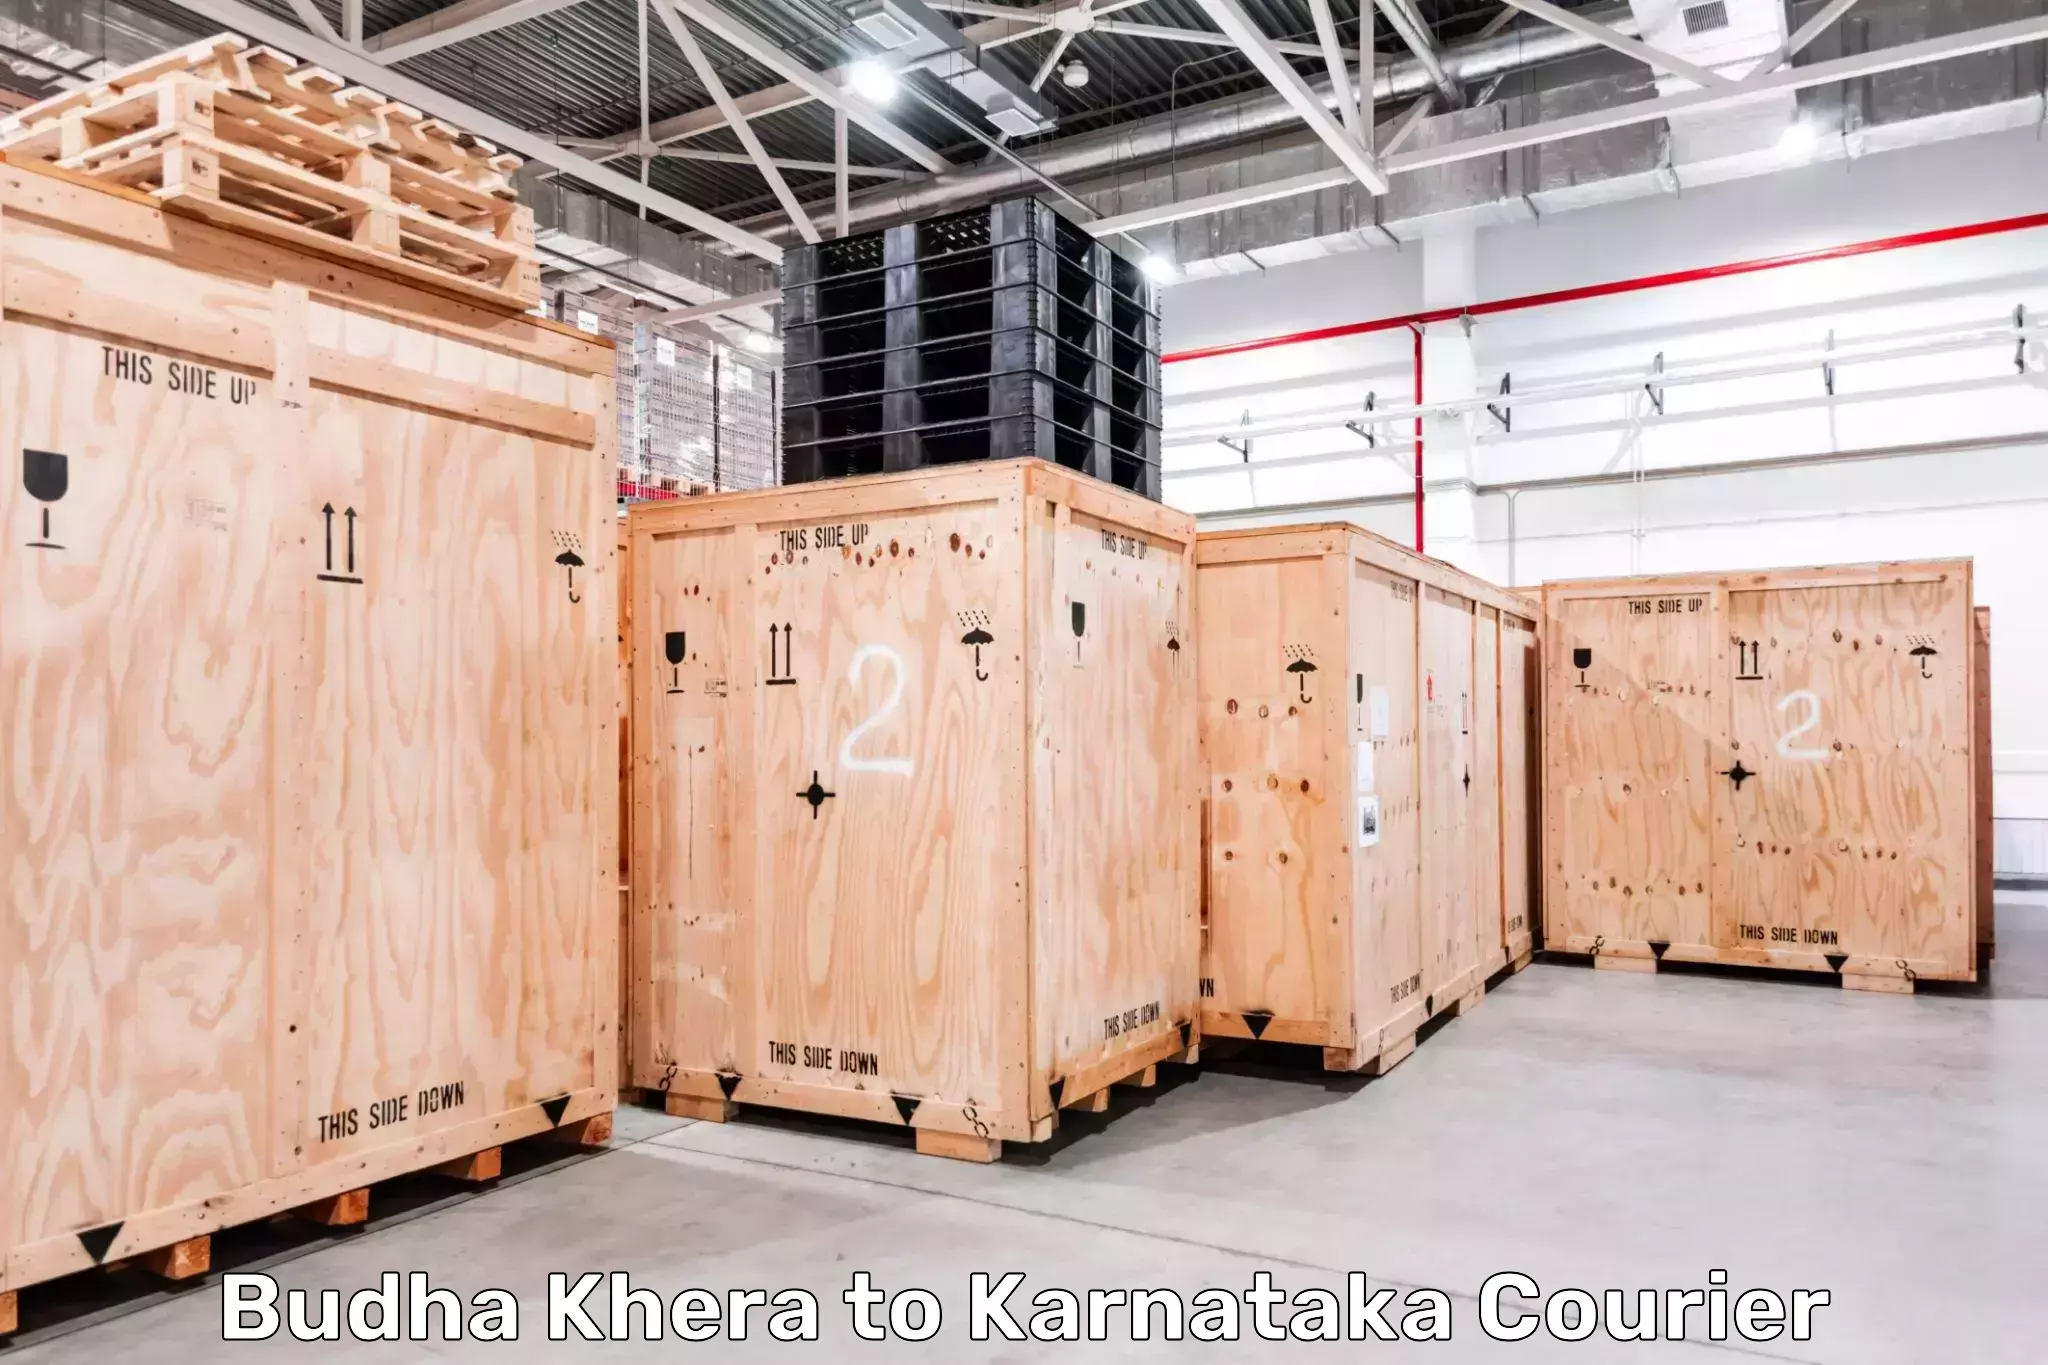 Global courier networks Budha Khera to Chikkamagalur